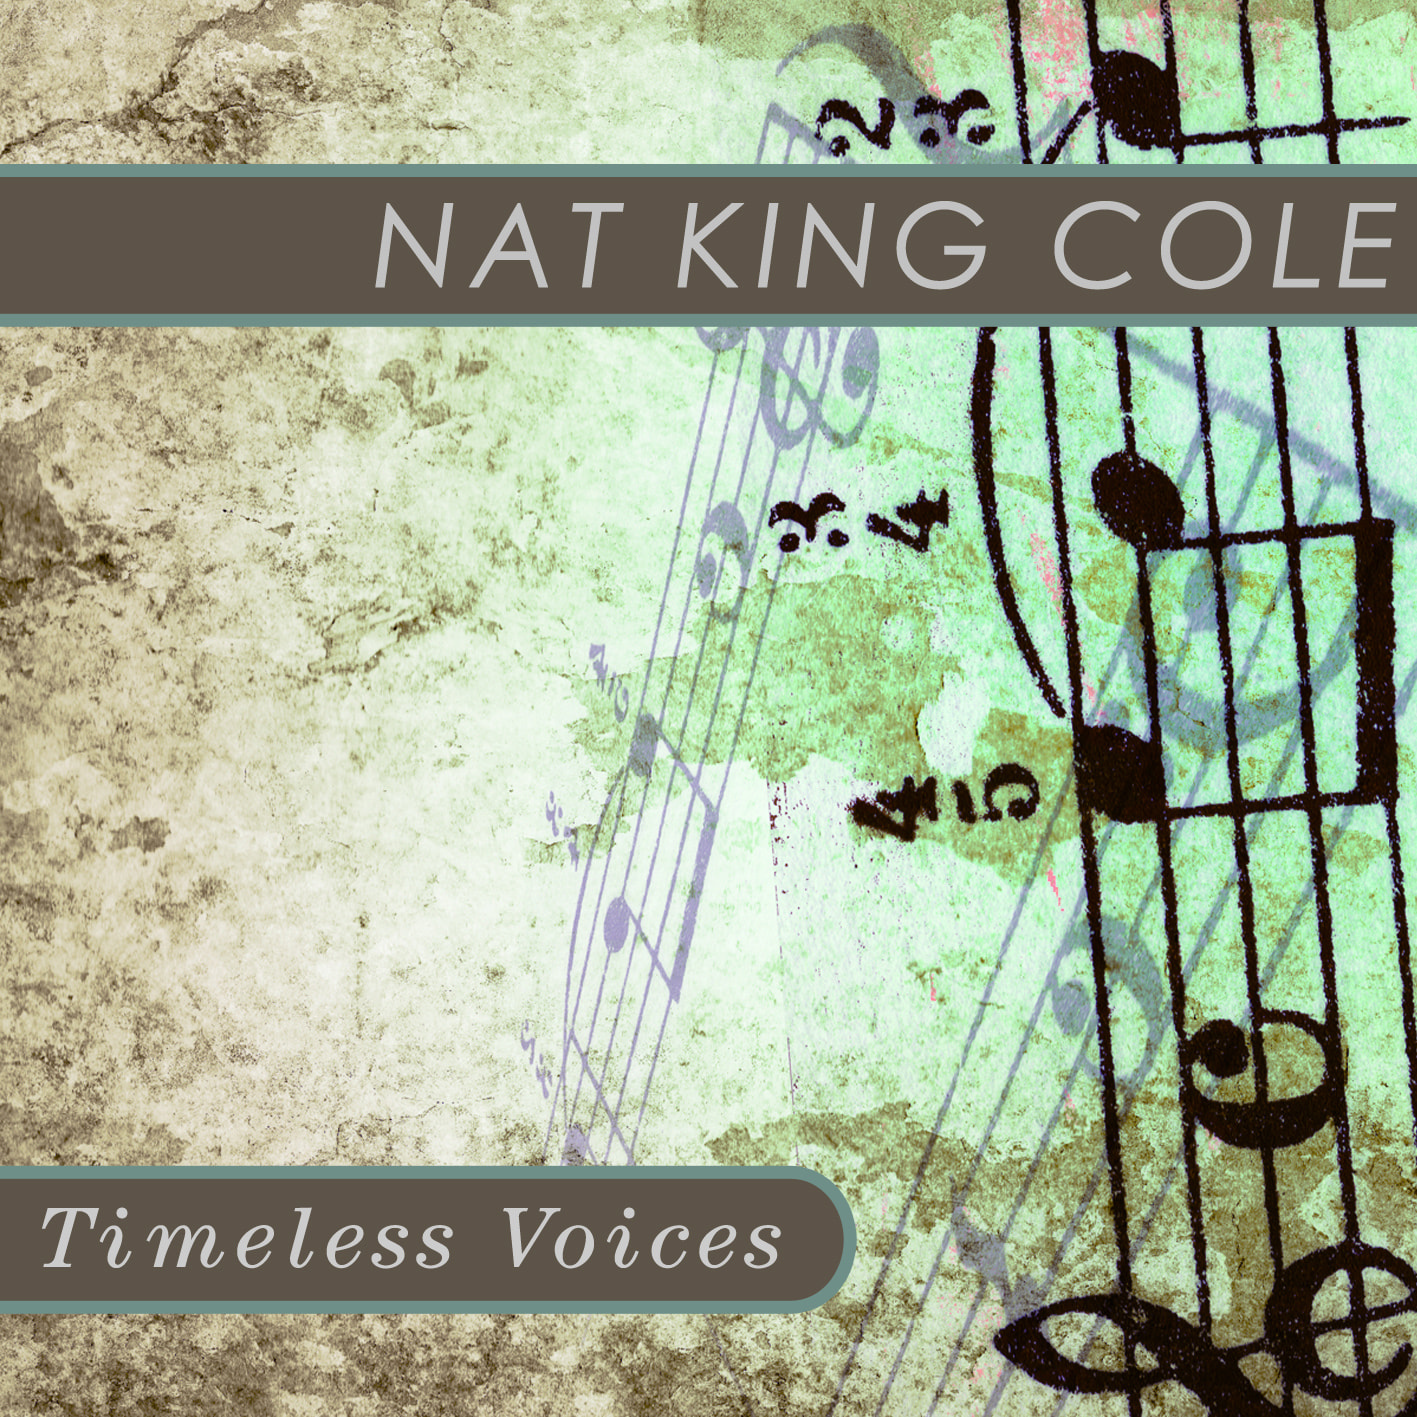 Timeless Voices: Nat King Cole